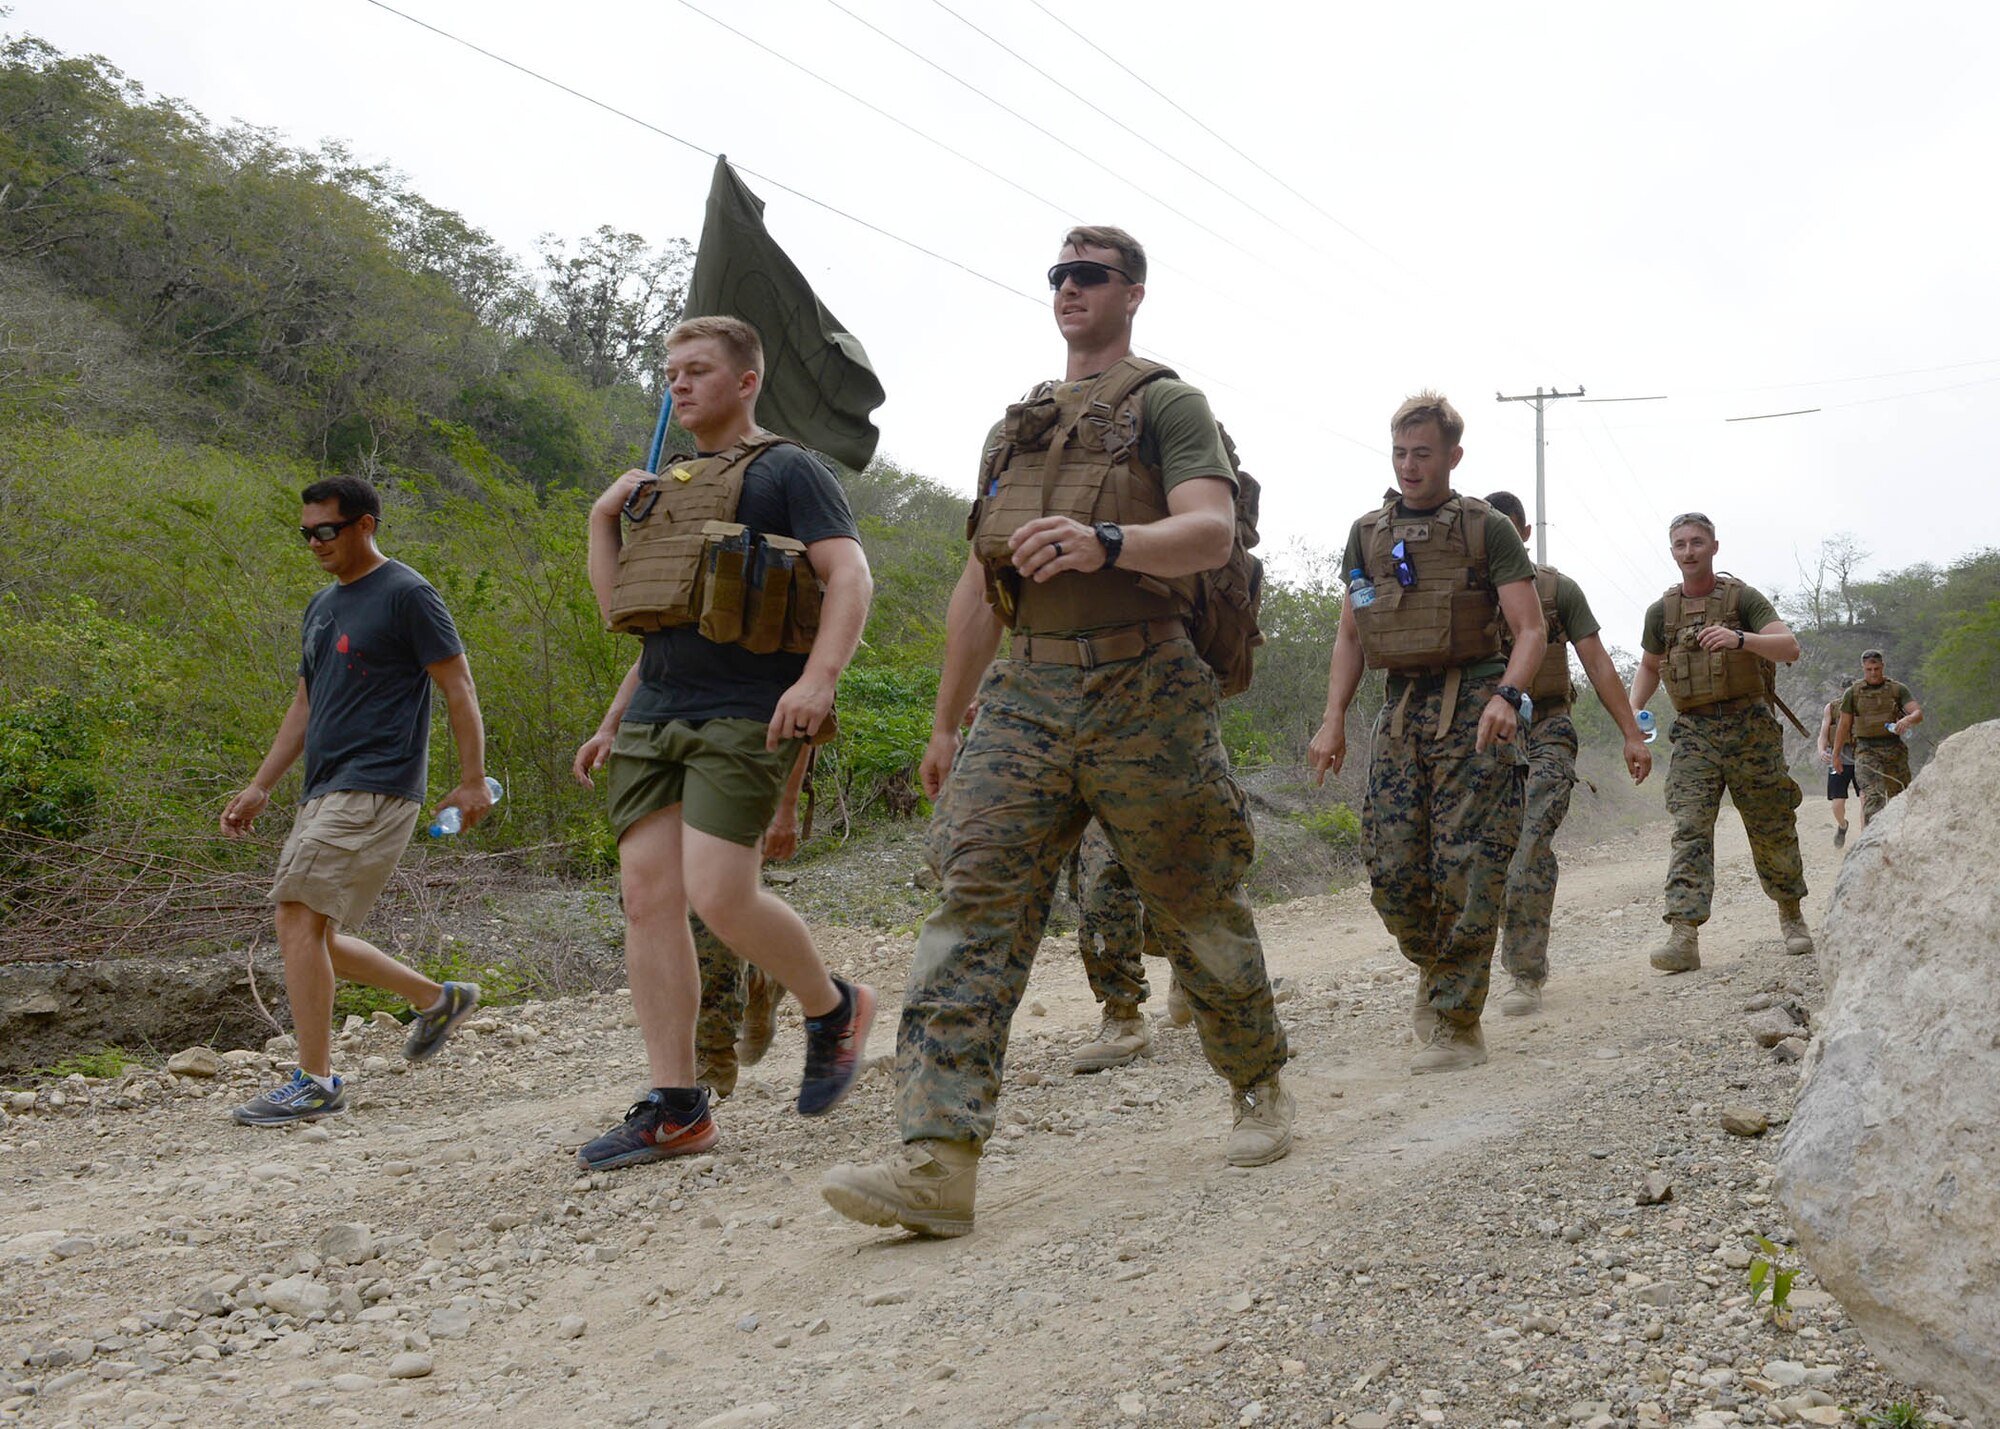 A group of U.S. service members march downhill while participating in a Sexual Assault Prevention and Response 5K Ruck March in Arroyo Cano, Dominican Republic, April 9, 2017. Together, all service members must work every day to instill and maintain a climate that does not tolerate or ignore sexist behavior, sexual harassment, or sexual assault. (U.S. Air Force photo by Staff Sgt. Timothy M. Young)